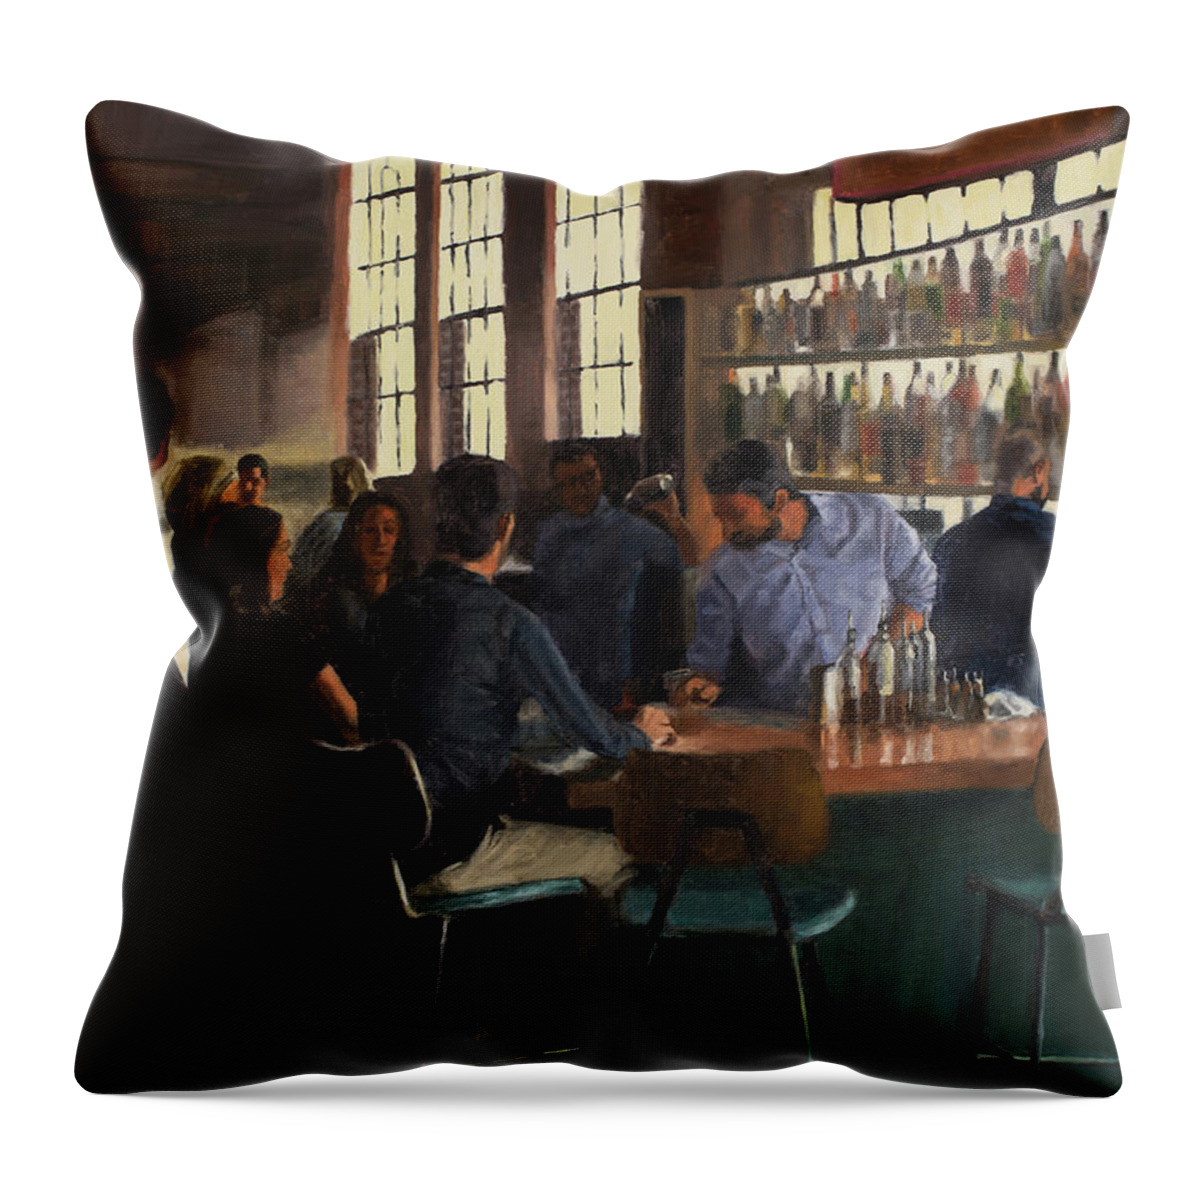 Bar Throw Pillow featuring the painting Where everyone knows your name by Tate Hamilton